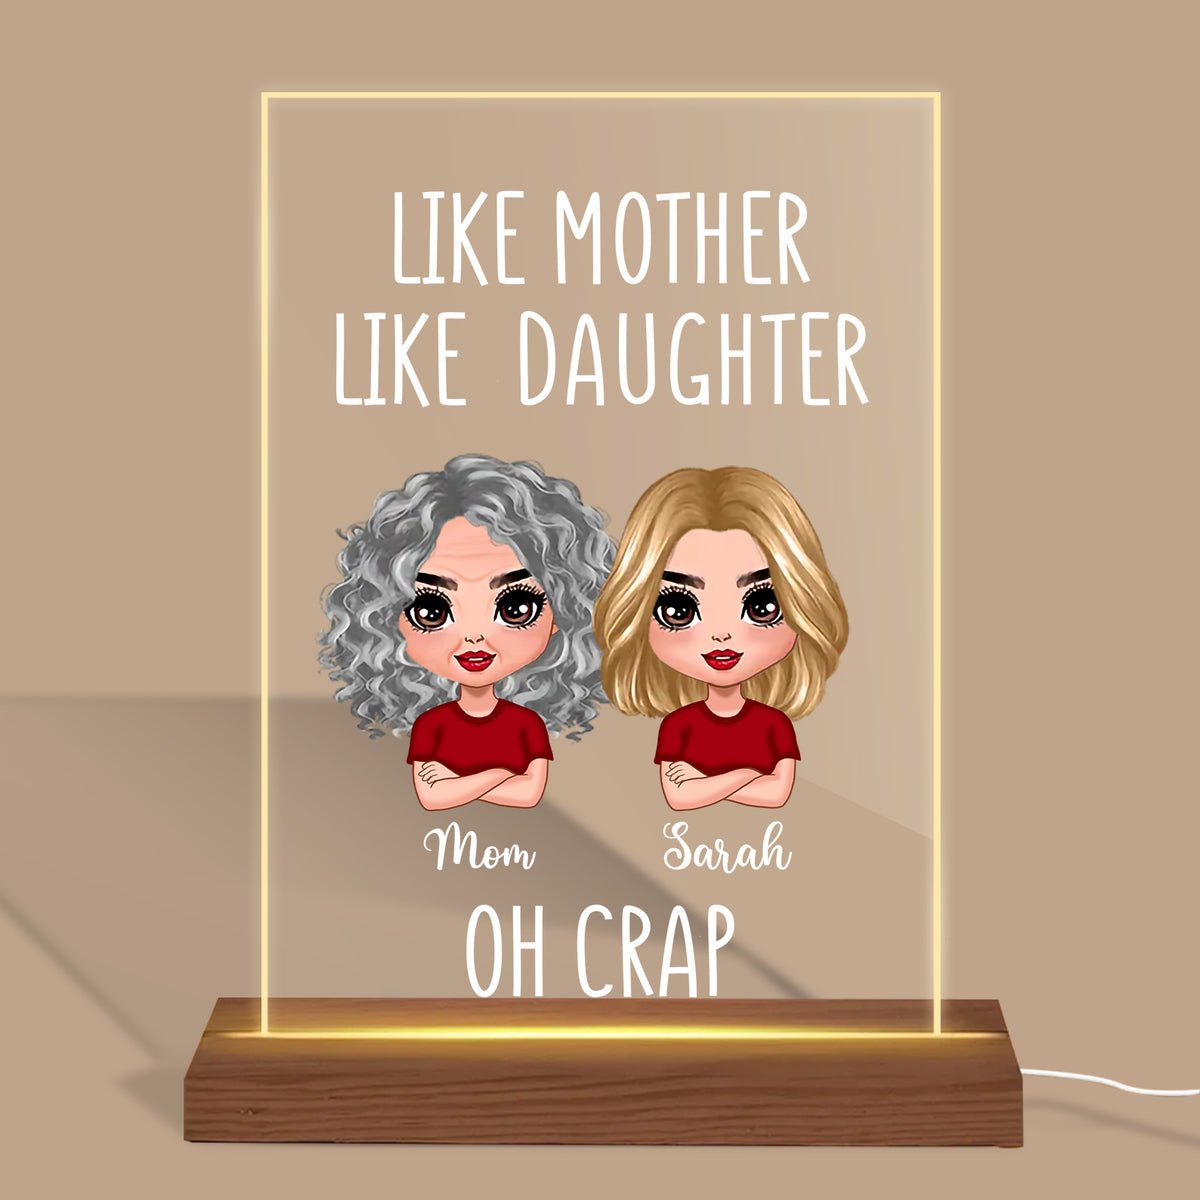 https://cdn.shopify.com/s/files/1/0640/1861/2460/products/like-mother-like-daughter-oh-crap-personalized-acrylic-led-lamp-best-gift-for-mother-231675_1600x.jpg?v=1681288030